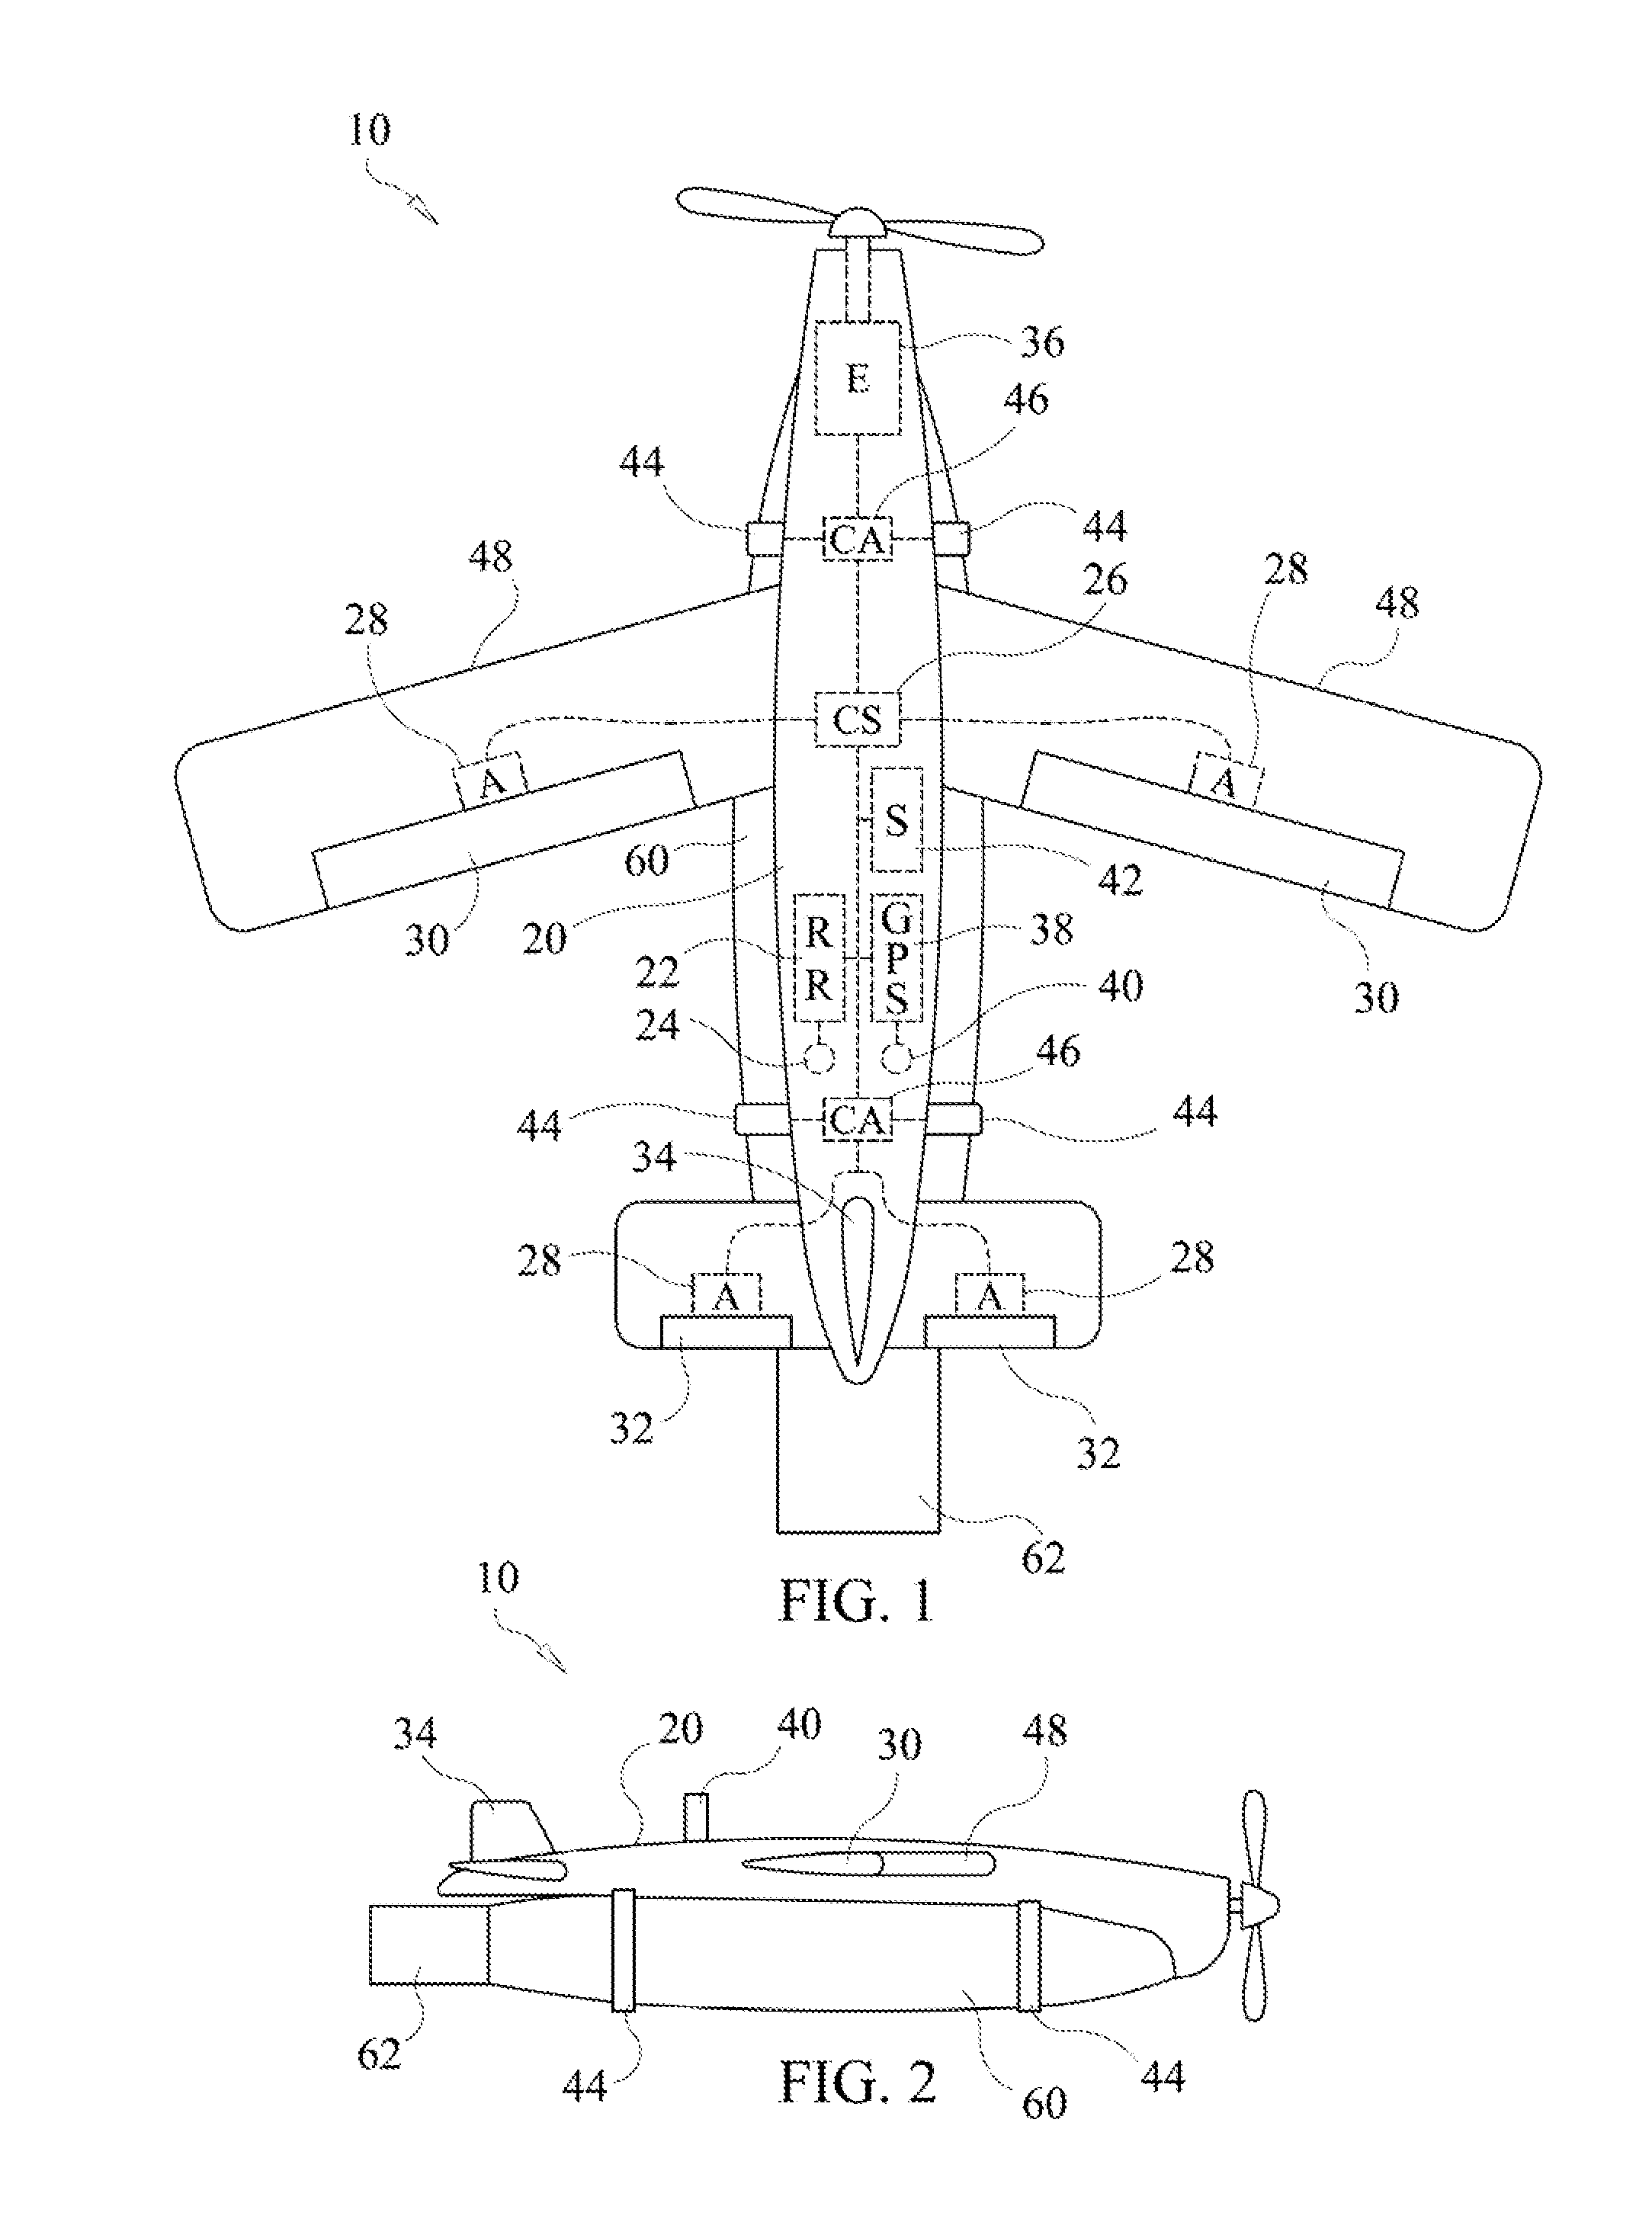 System and method for airborne deployment of object designed for waterborne task